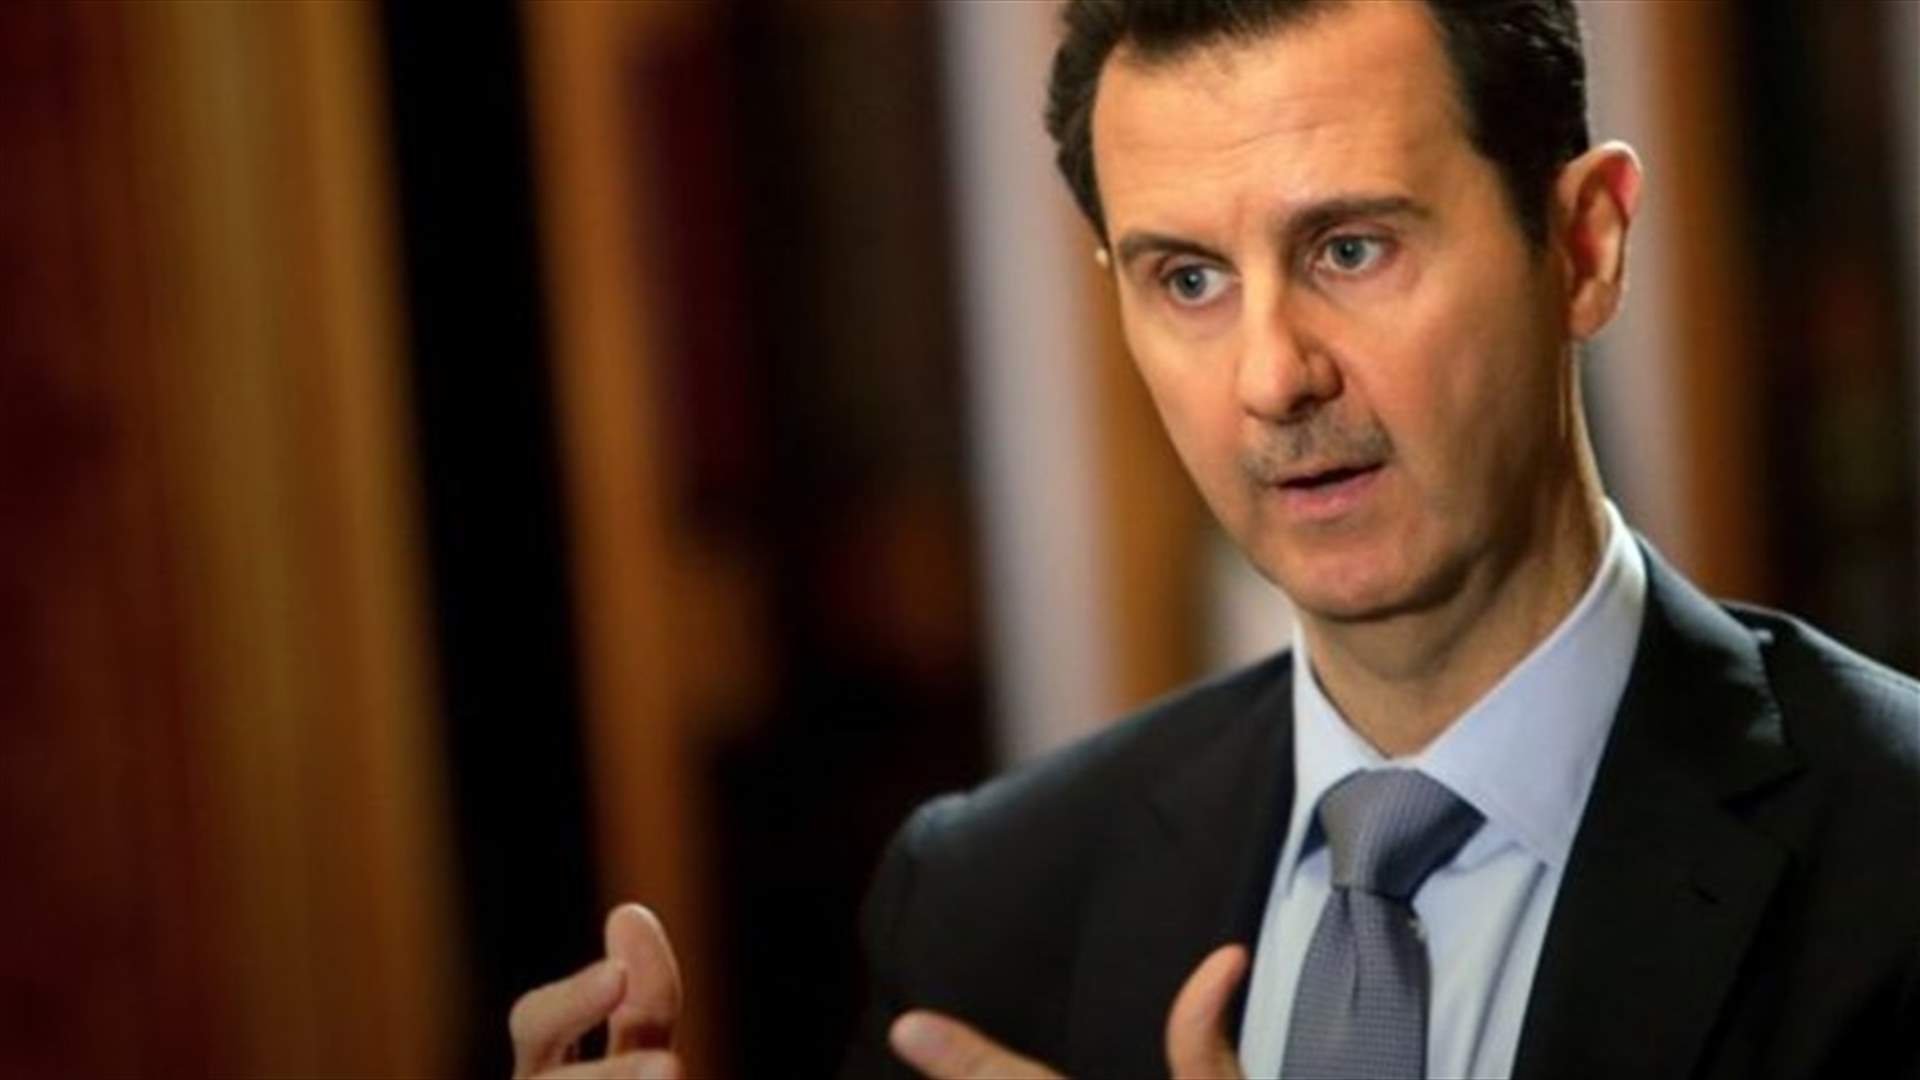 Syria&#39;s Assad says Putin has not talked about political transition